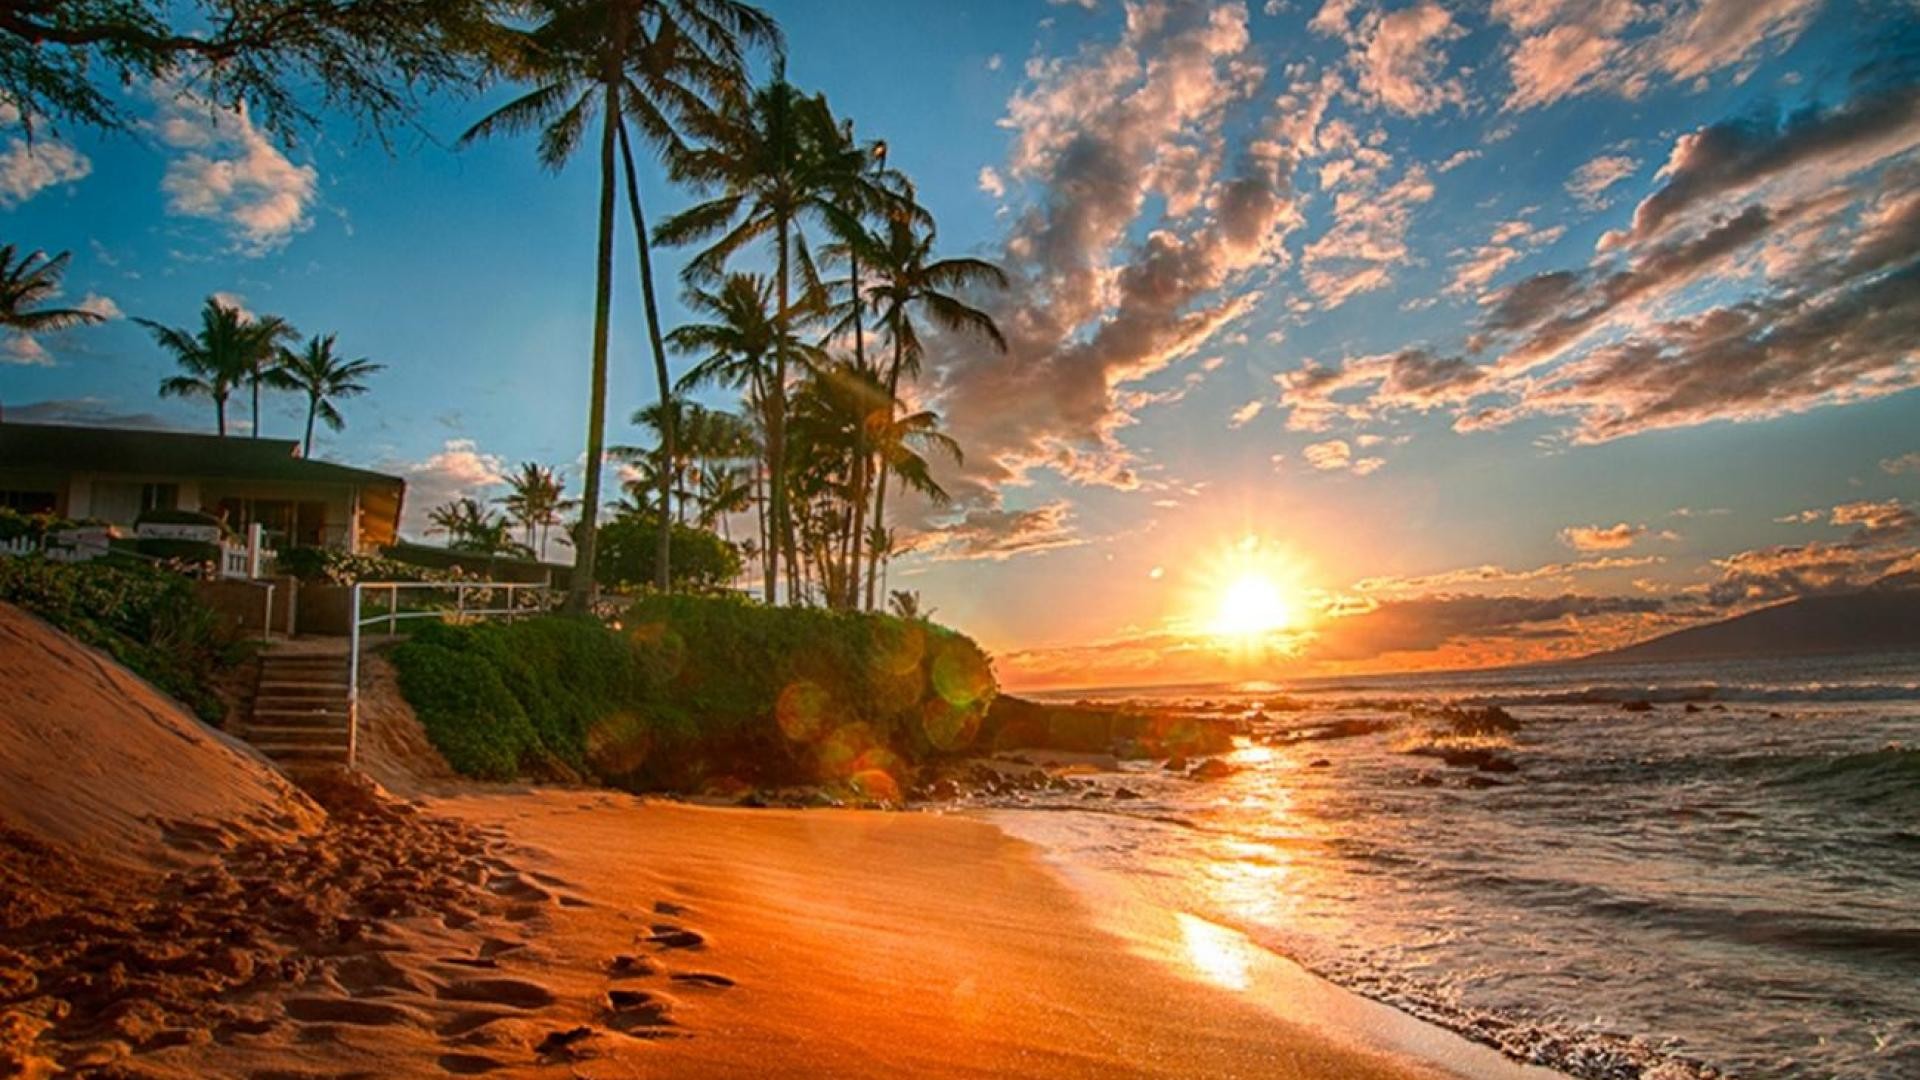 1920x1080 Awesome Hawaii Images Collection: Hawaii Wallpapers